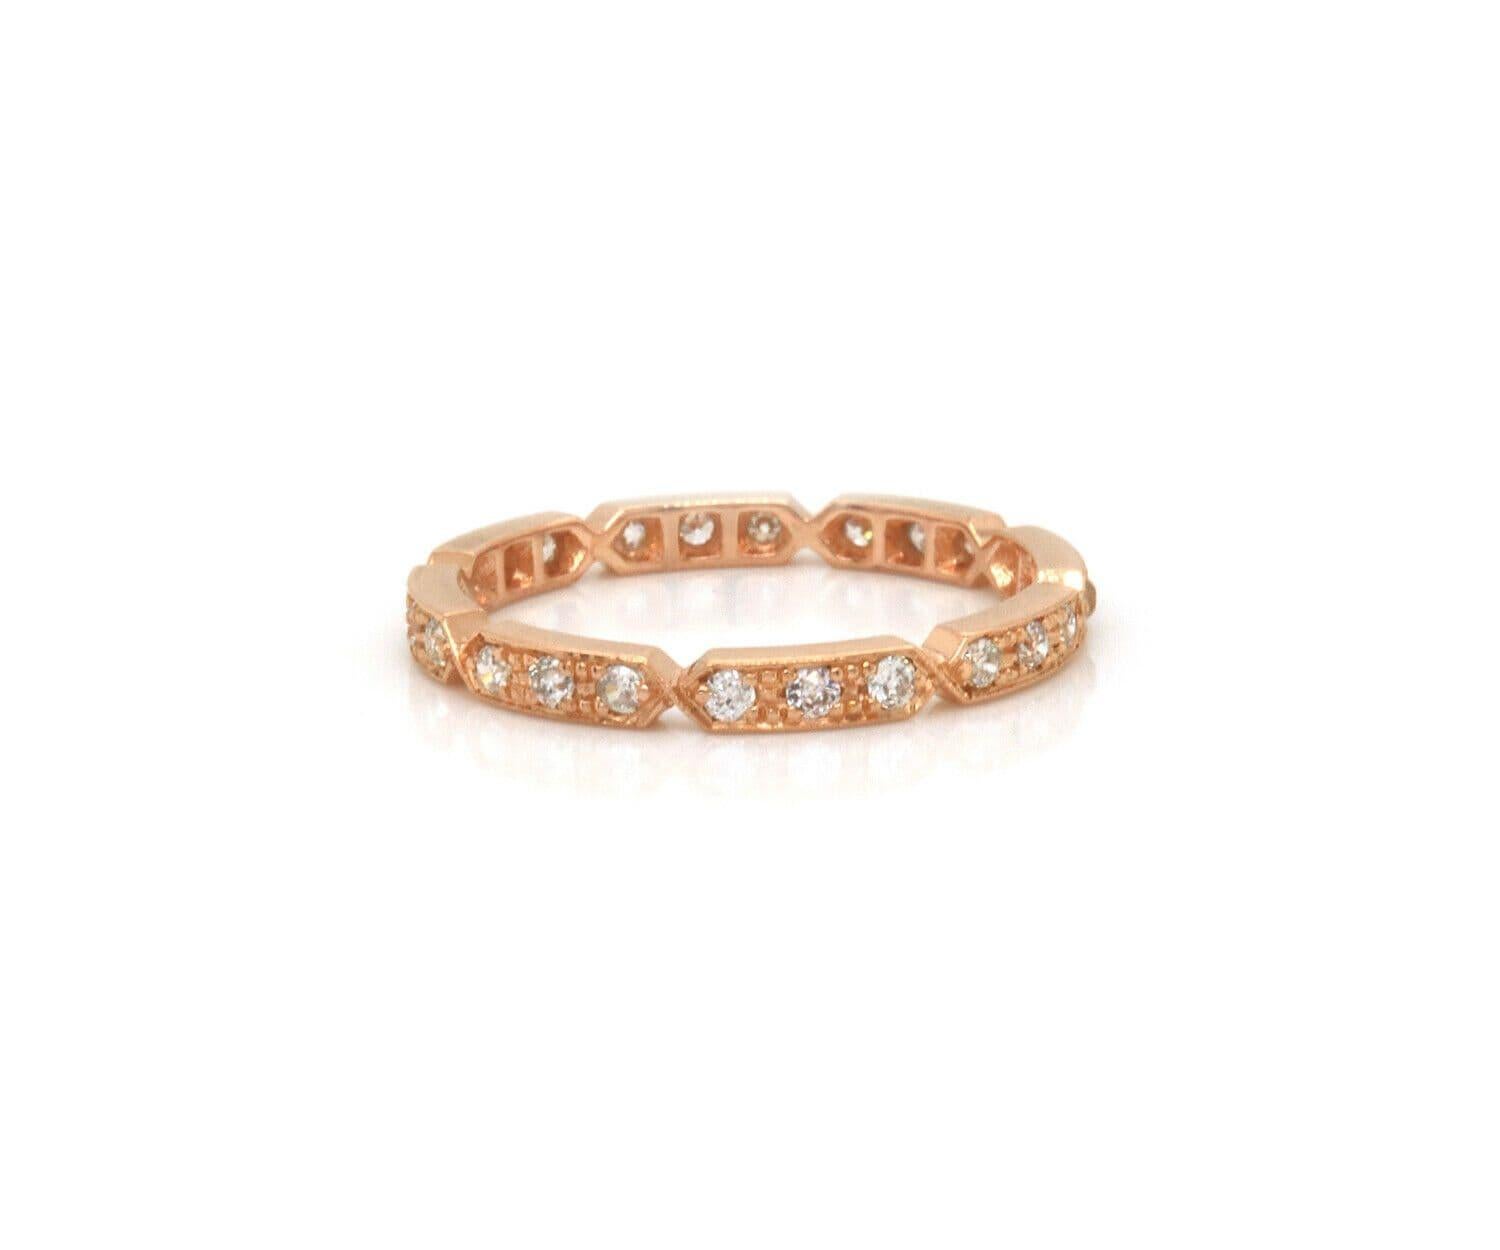 0.20ctw Diamond Octagonal Eternity Wedding Band Ring in 14K Rose Gold In Excellent Condition For Sale In Vienna, VA